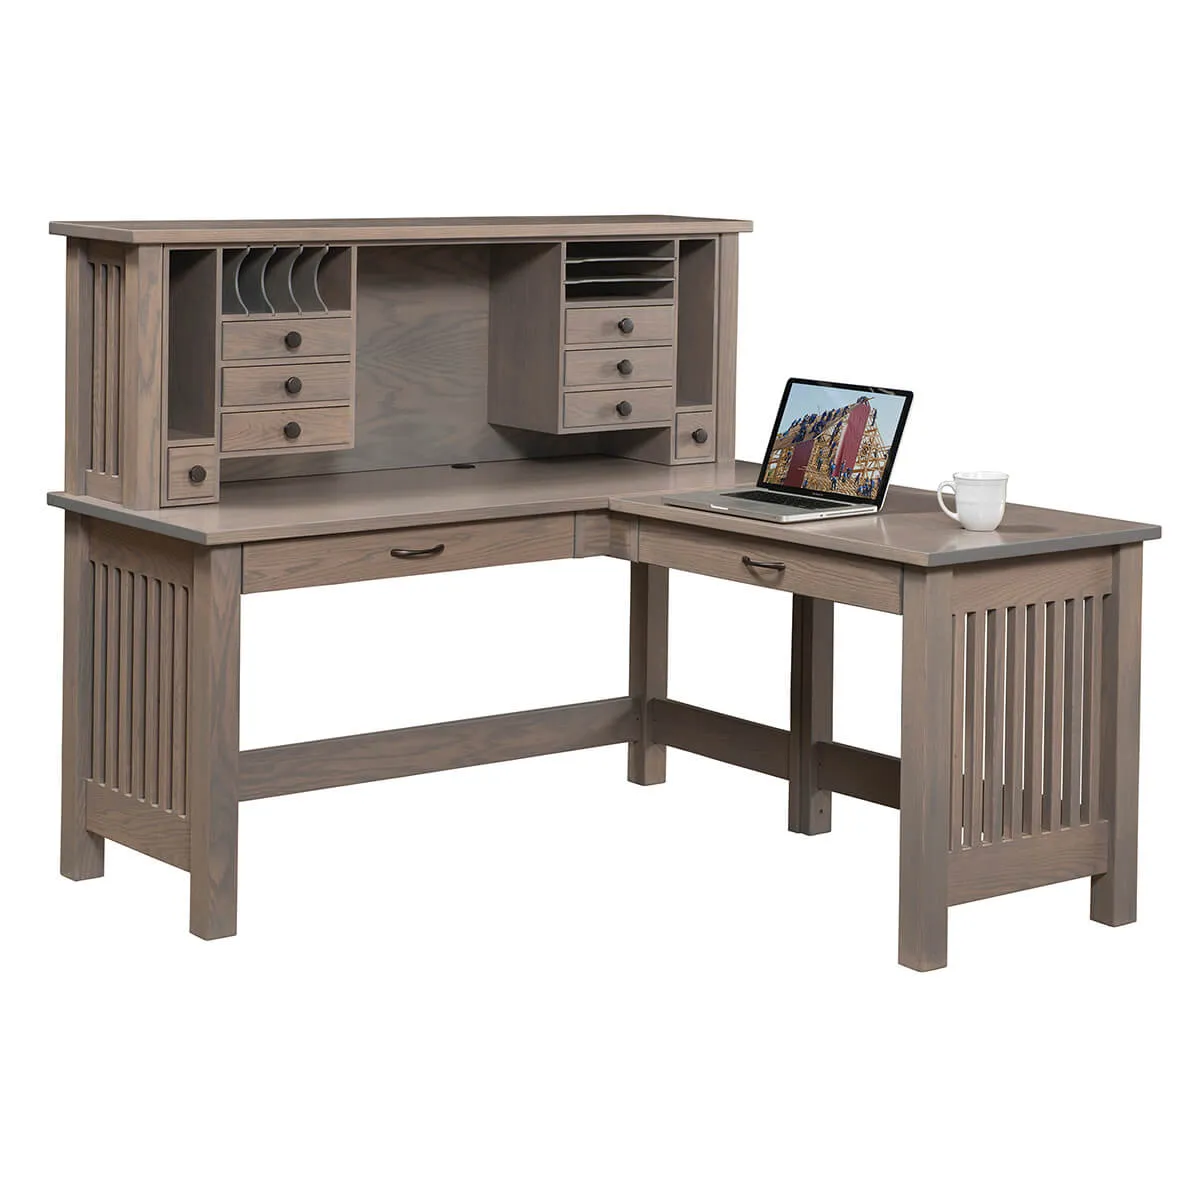 JDs Deluxe L-Desk with Organizer